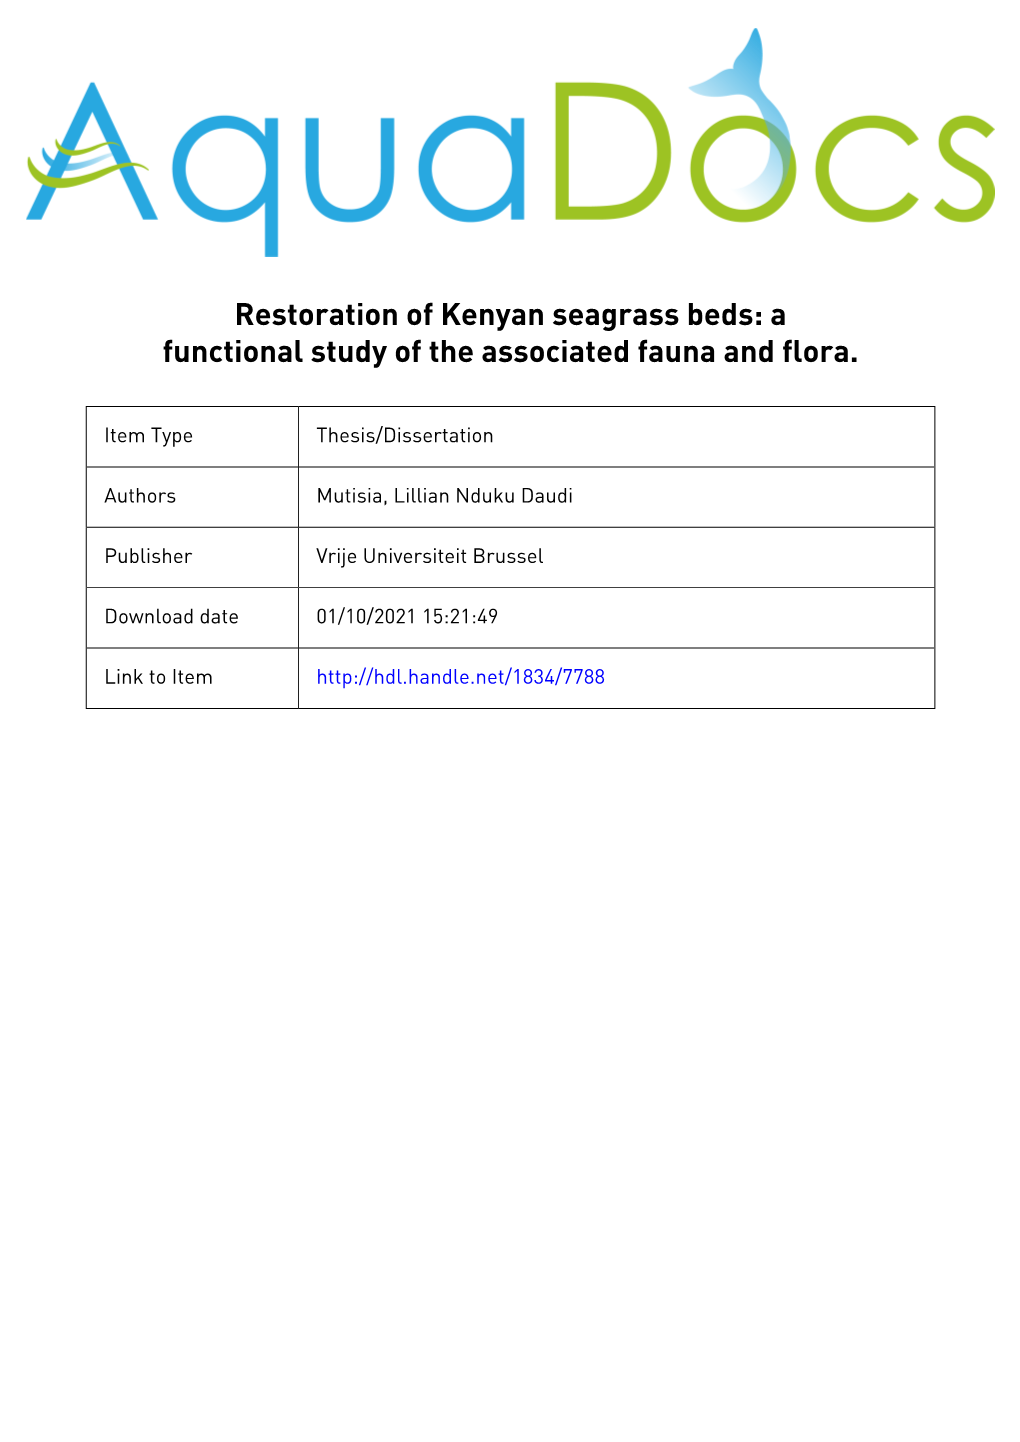 Restoration of Kenyan Seagrass Beds: a Functional Study of the Associated Fauna and Flora